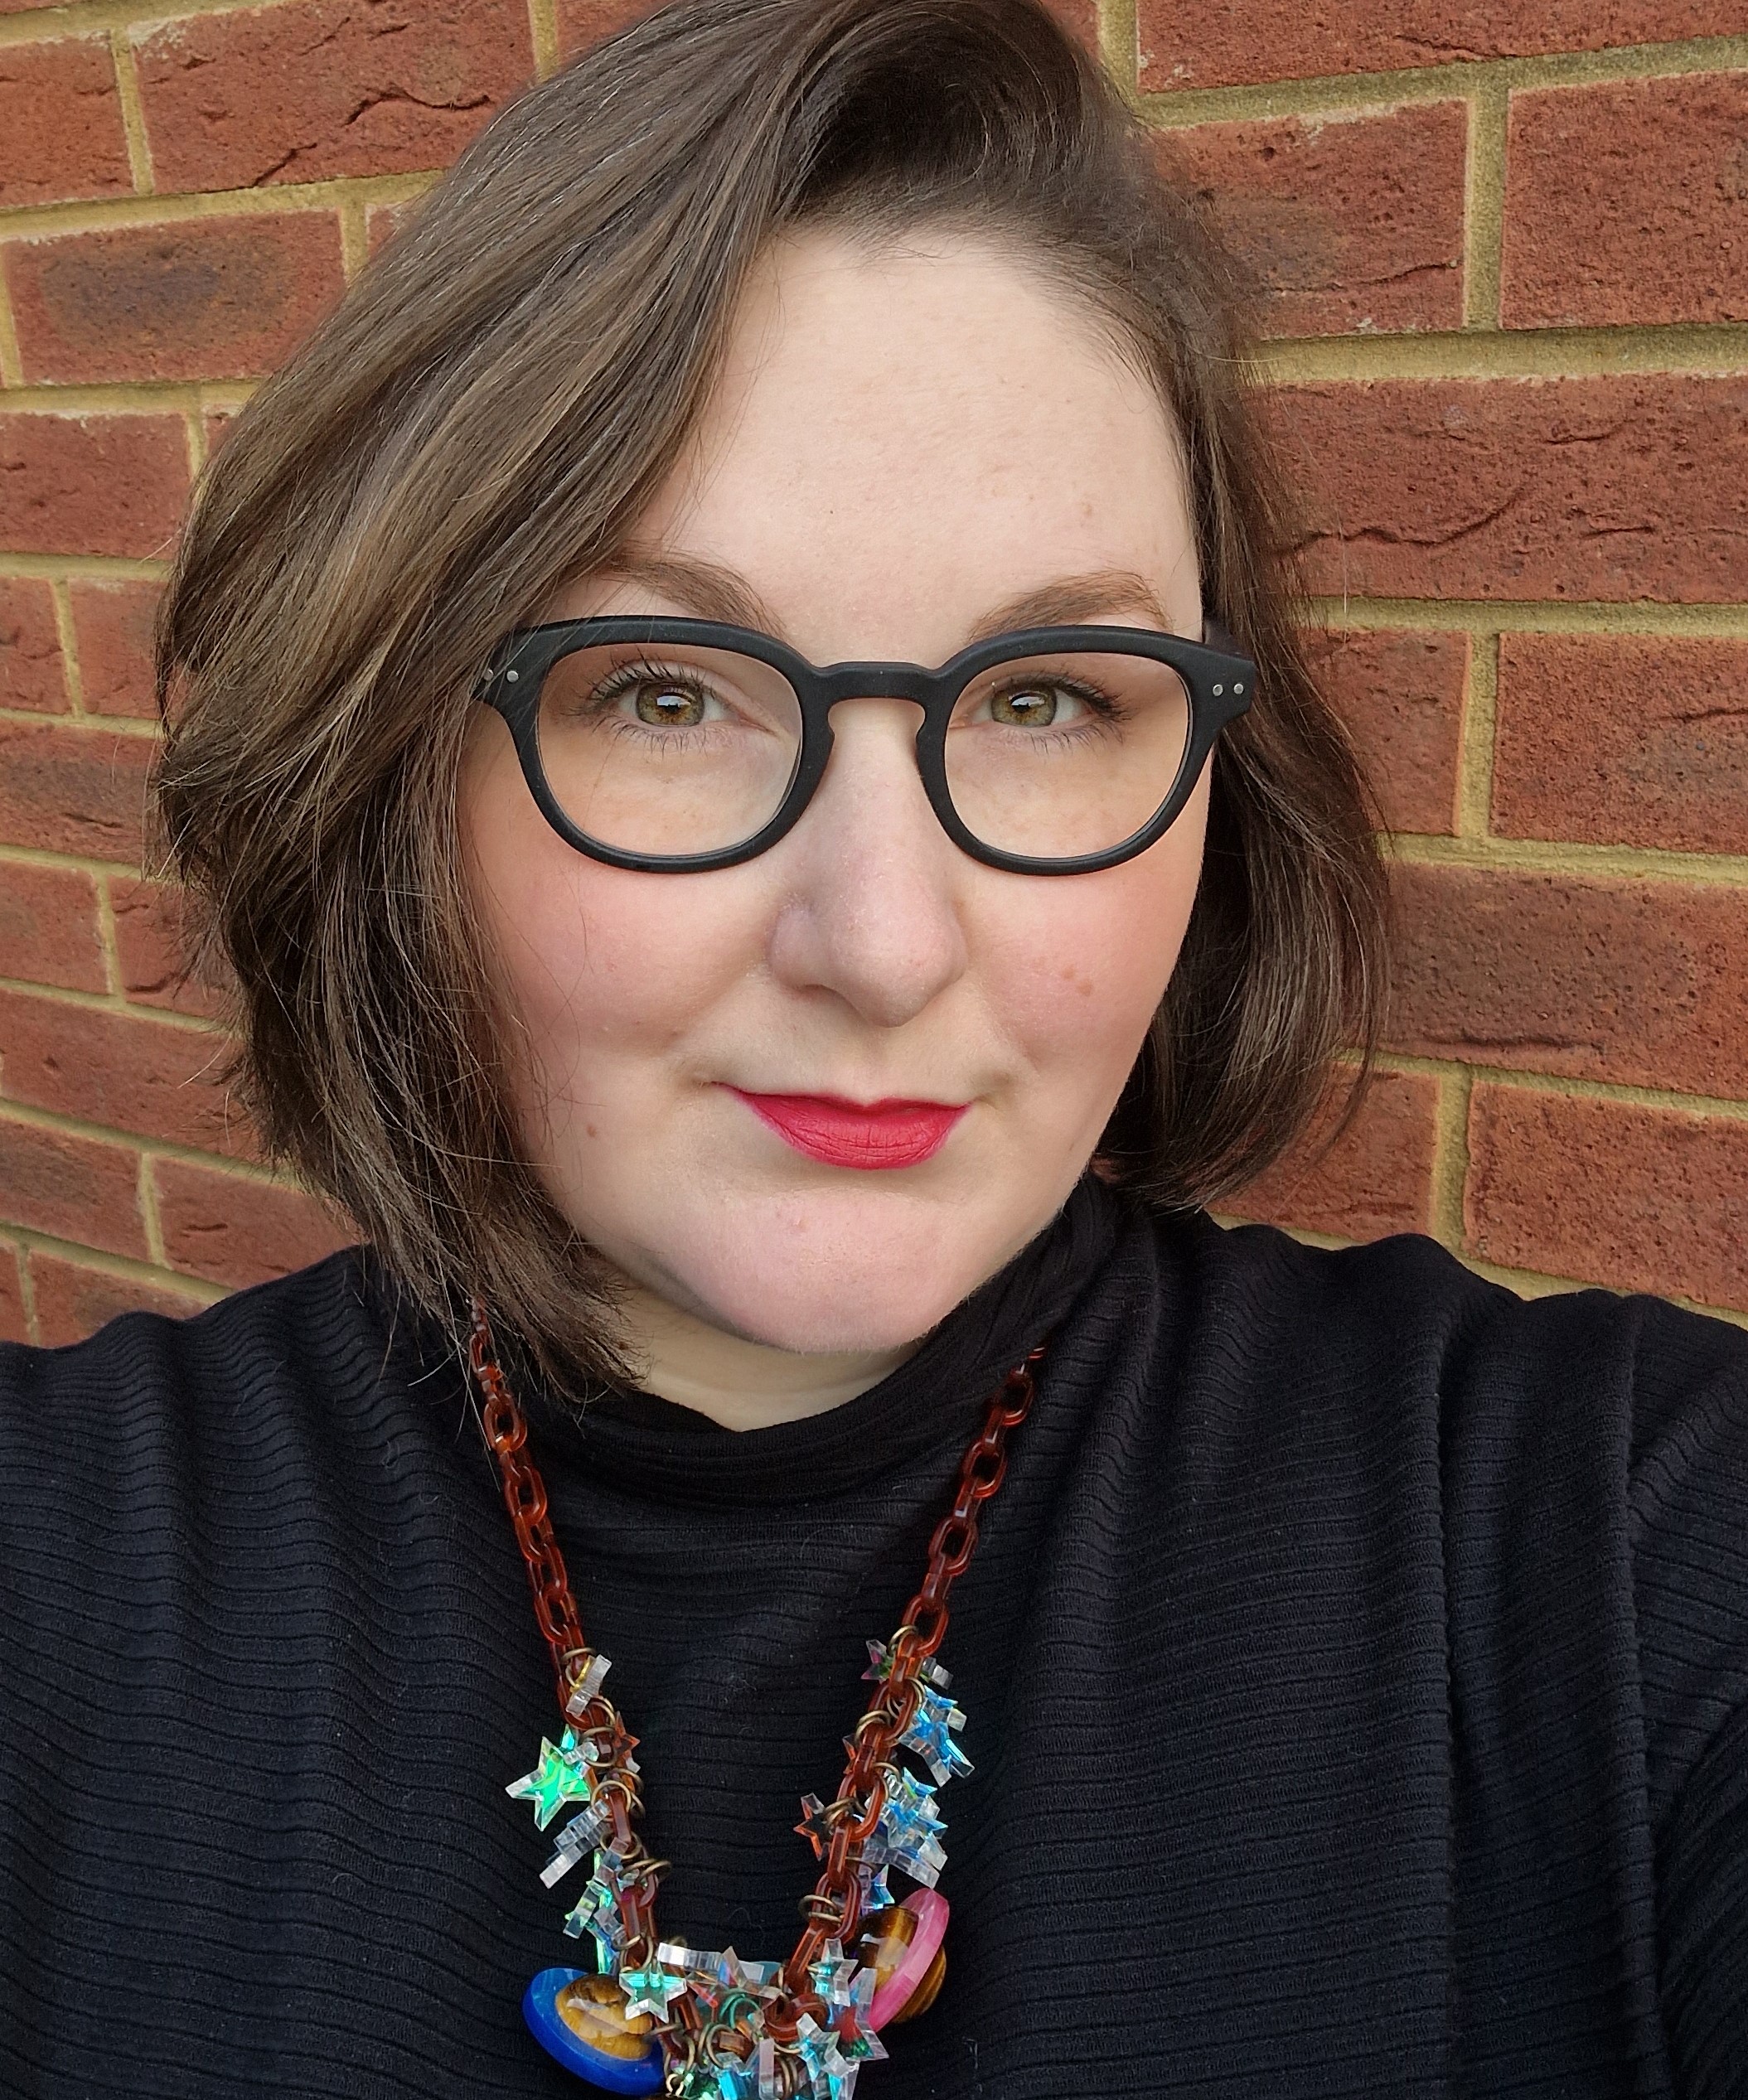 Headshot of Kimberley Freeman, a white woman with glasses wearing a black turtleneck, standing in front of a red brick wall